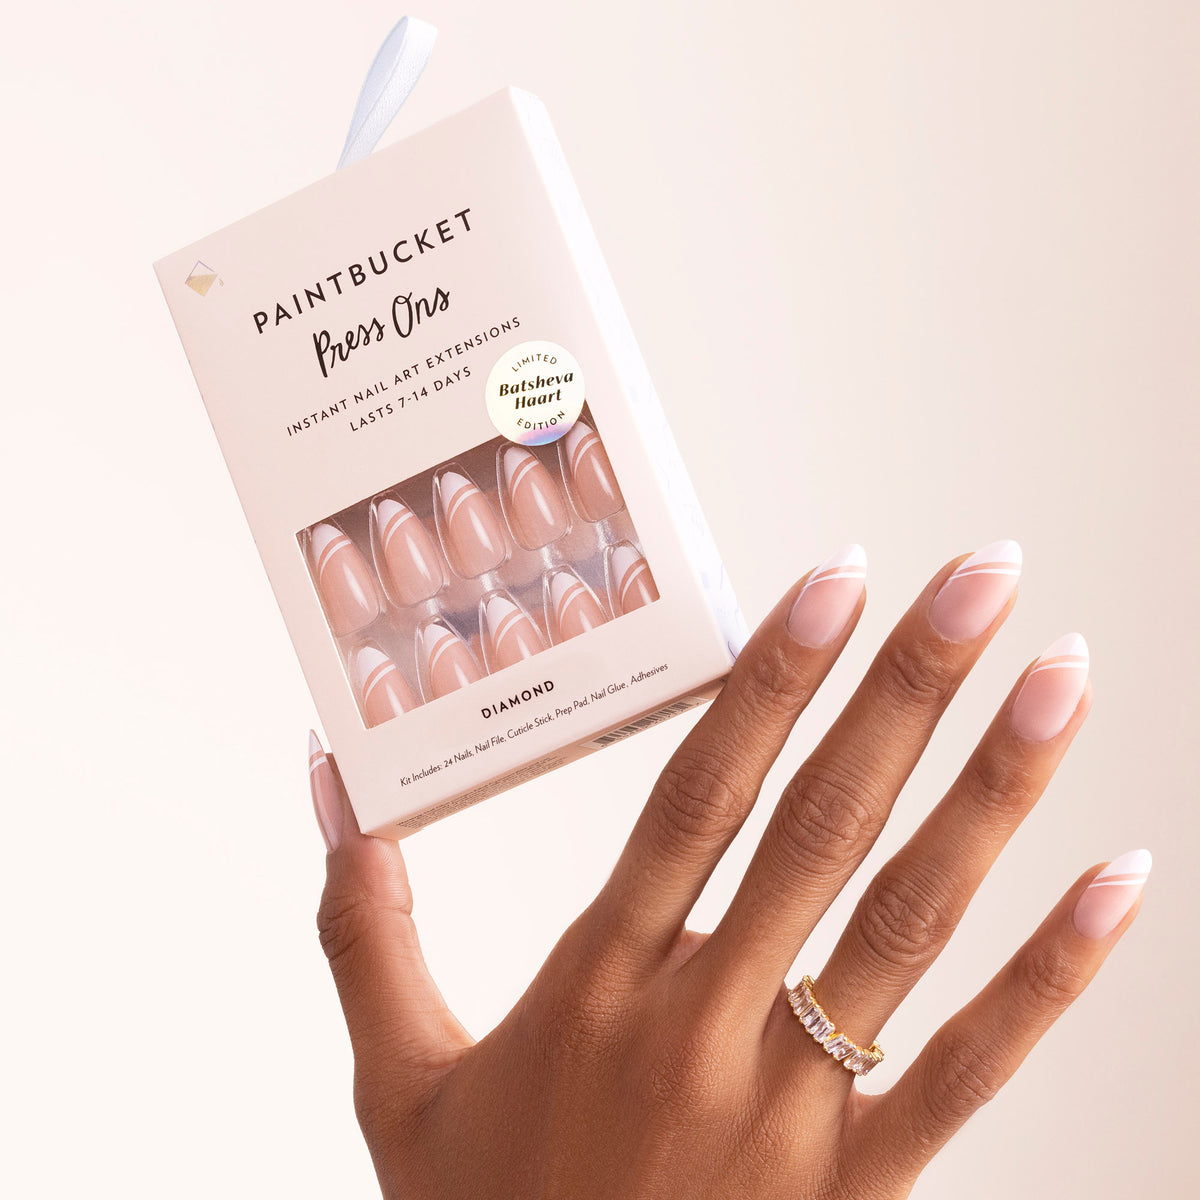 I Tried Press-on Nails for a DIY Manicure That Cost Less Than $20